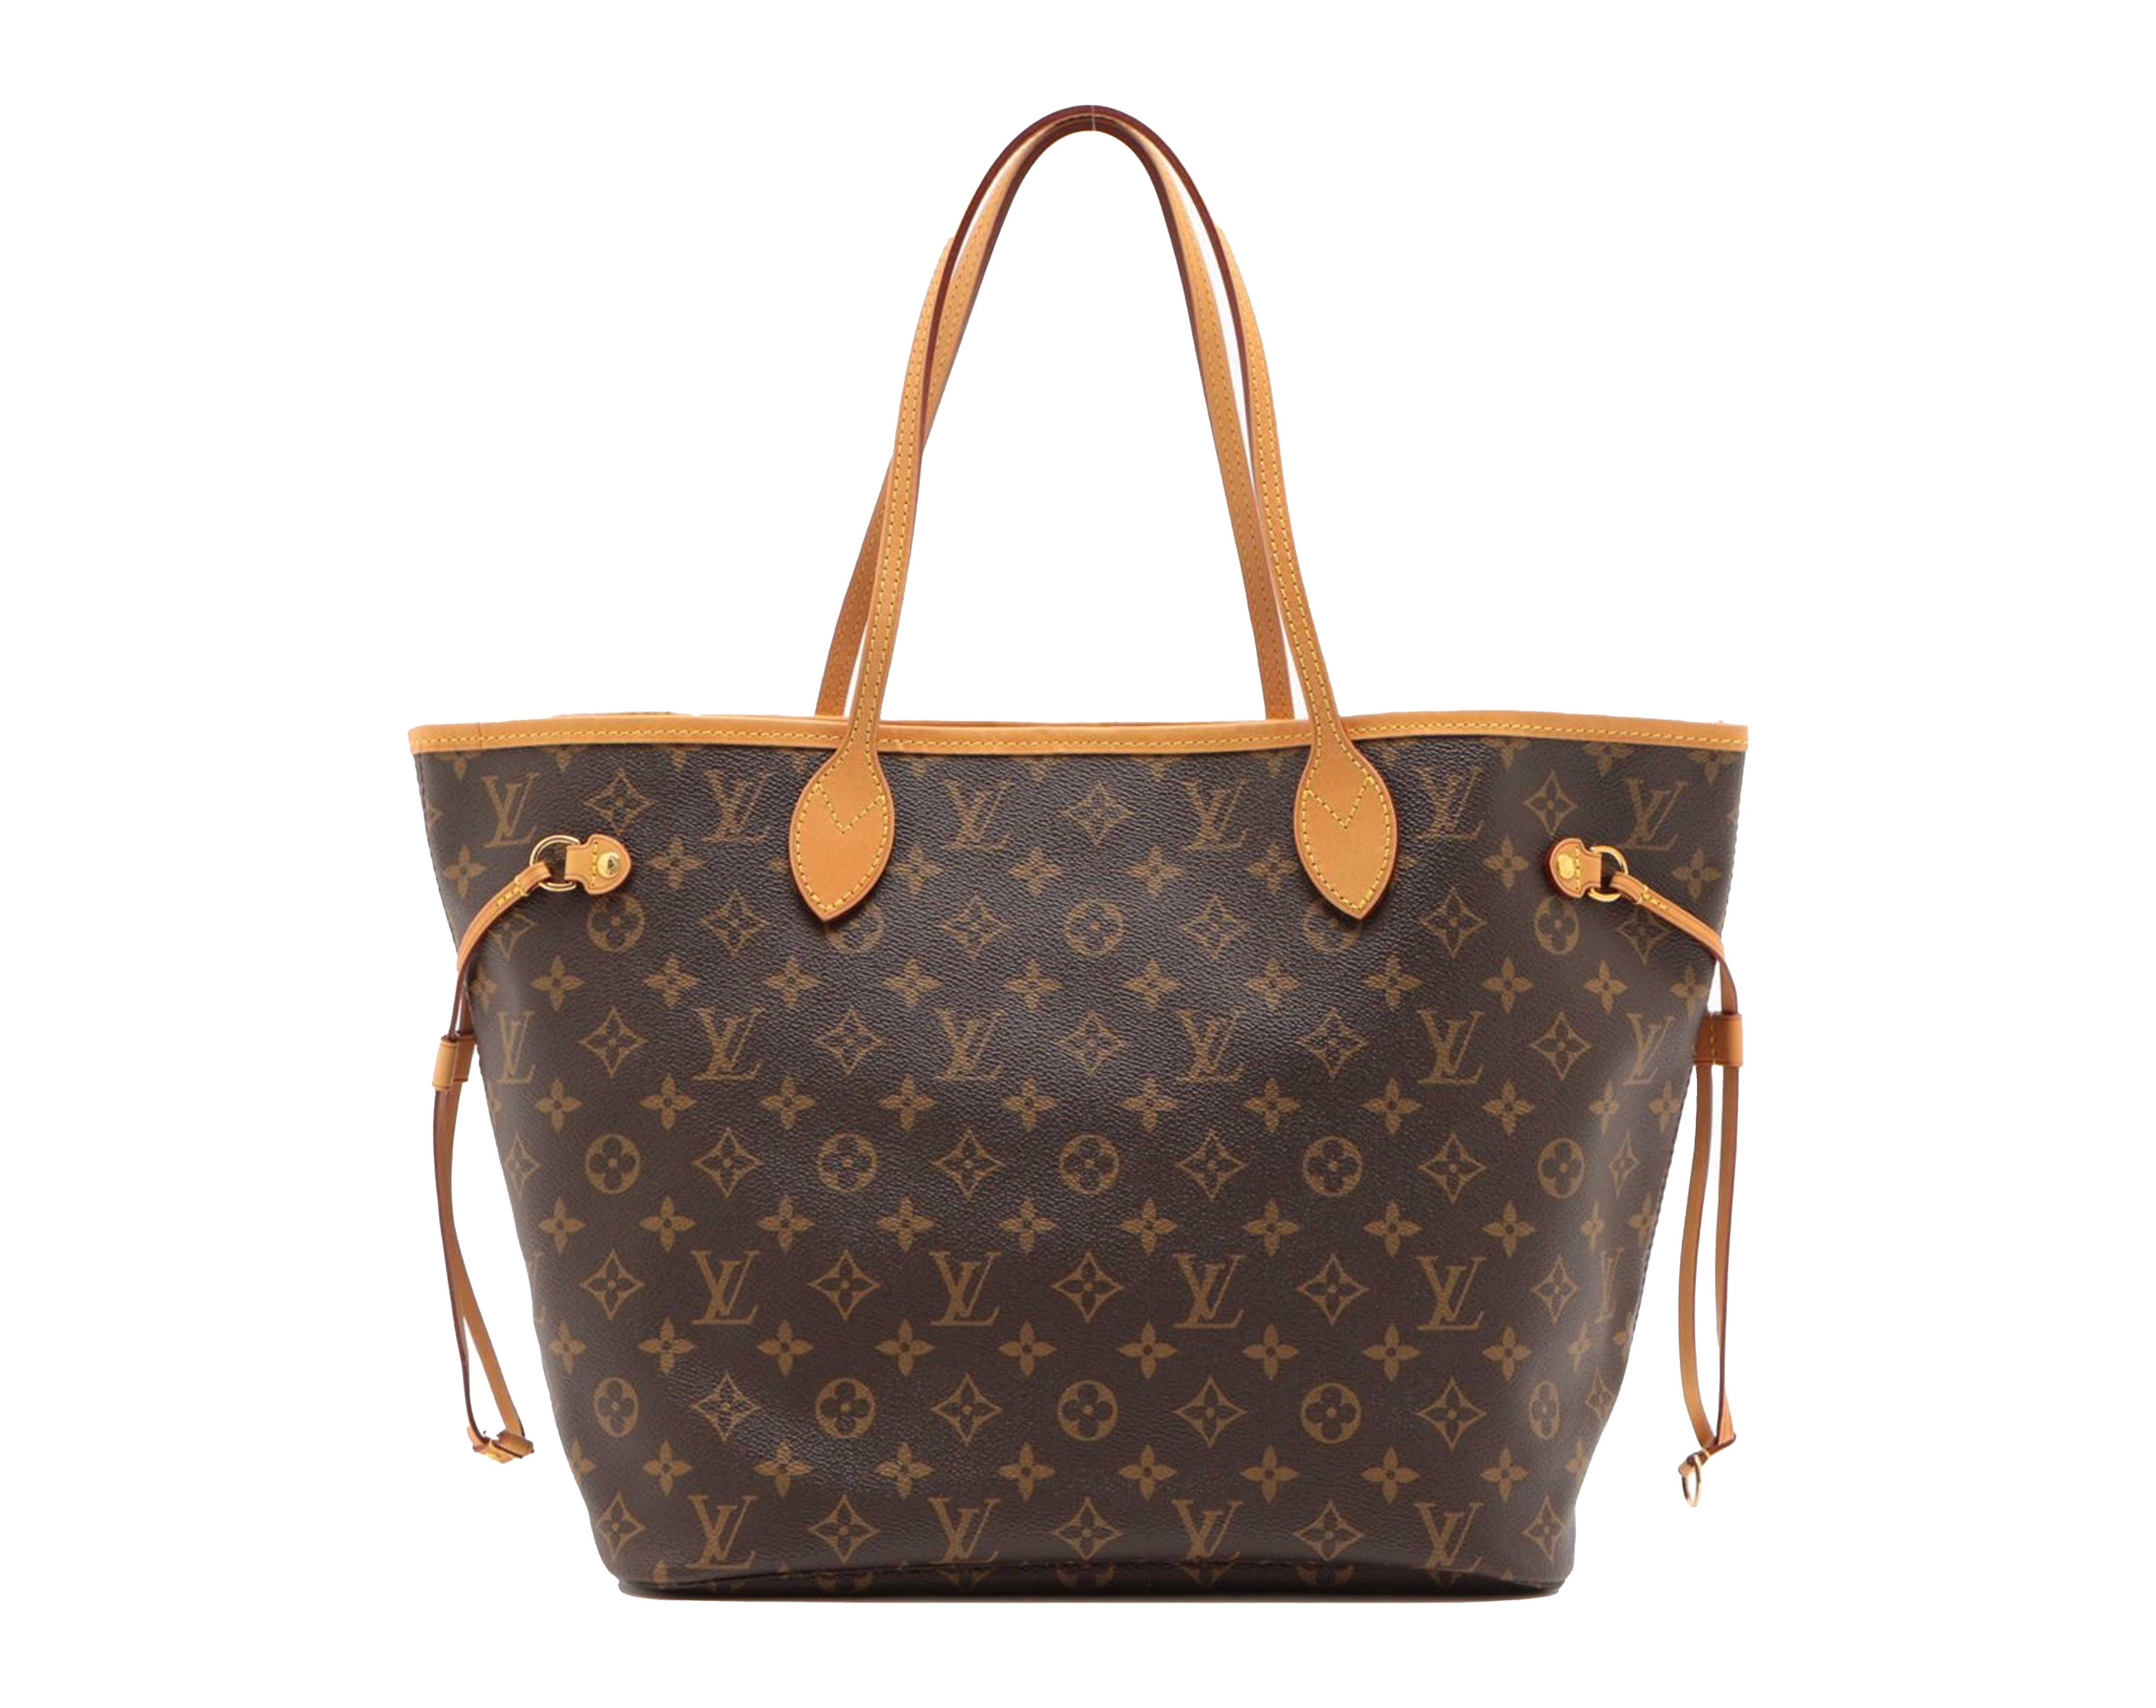 Store Owner Charged After $40M In Fake Louis Vuitton & More Discovered